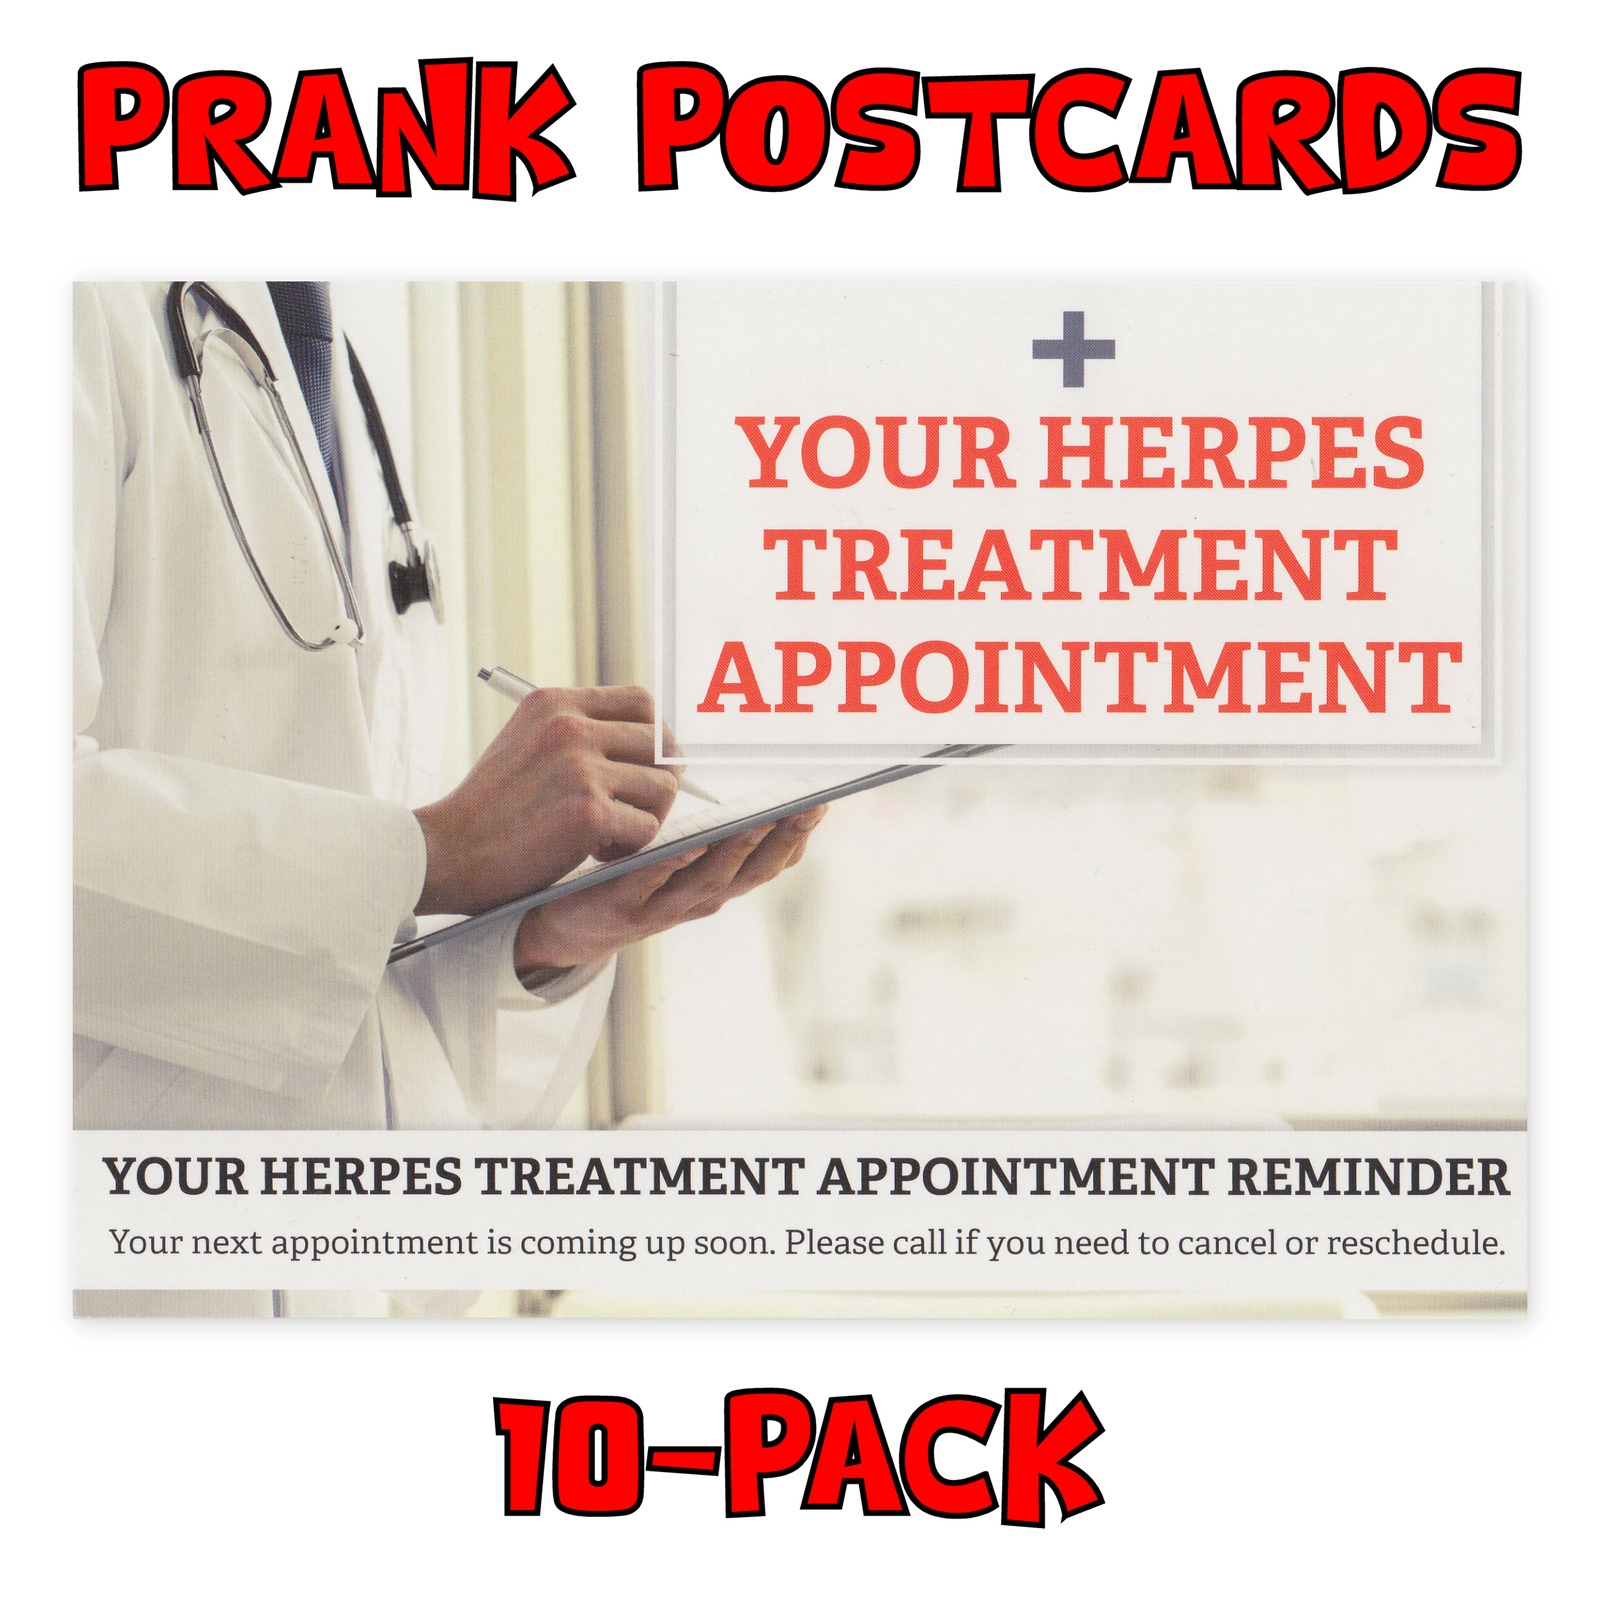 (10-Pack) Prank Postcards - Herpes Treatment - Send Them To Victims Yourself